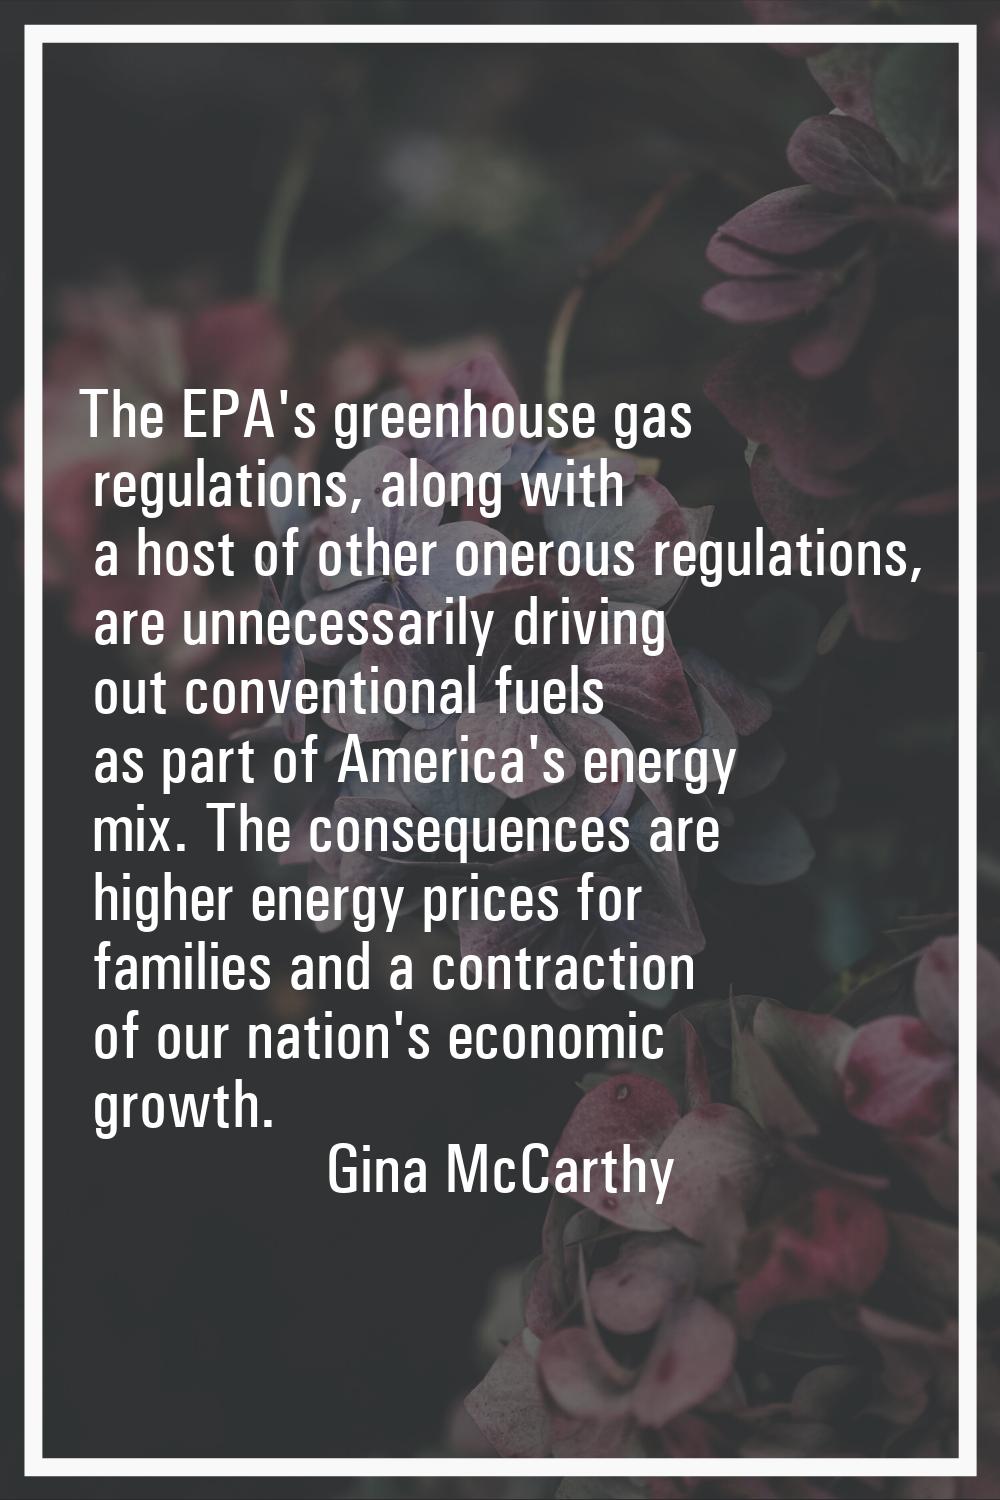 The EPA's greenhouse gas regulations, along with a host of other onerous regulations, are unnecessa